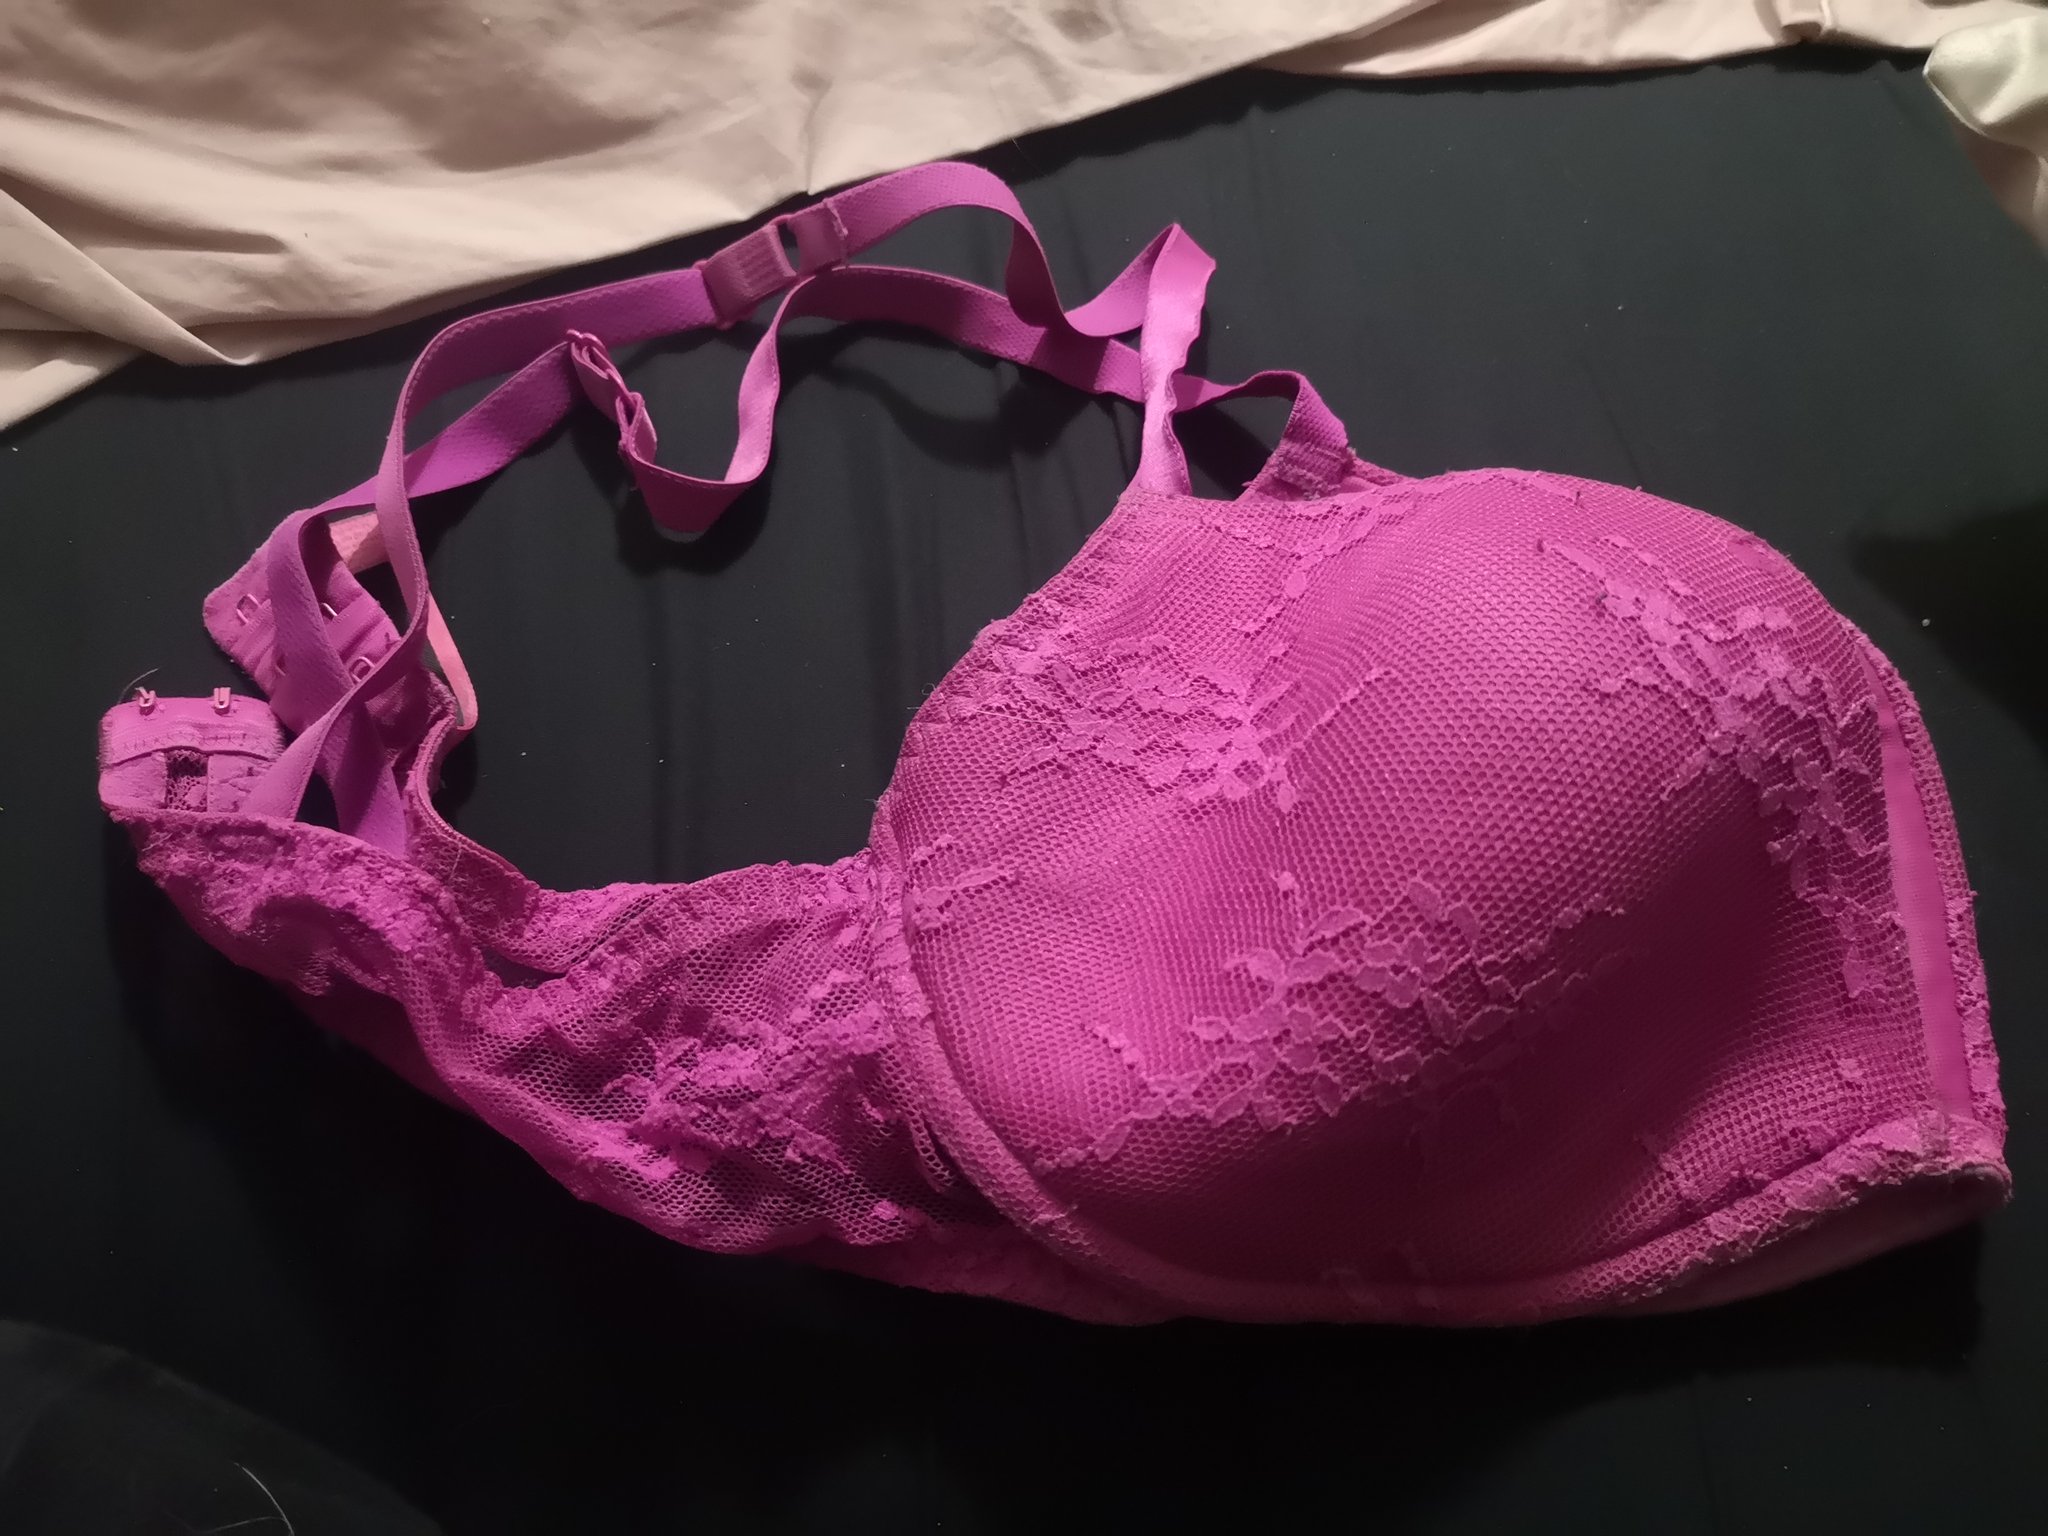 KathRedrum @ OF 50% OFF on X: Anyone interested in buying my used bra off  of me? $20. DM for details, serious inquiries only. #bra #usedbra  #braforsell #pantiesforsell #sellingbra #pinkbra  /